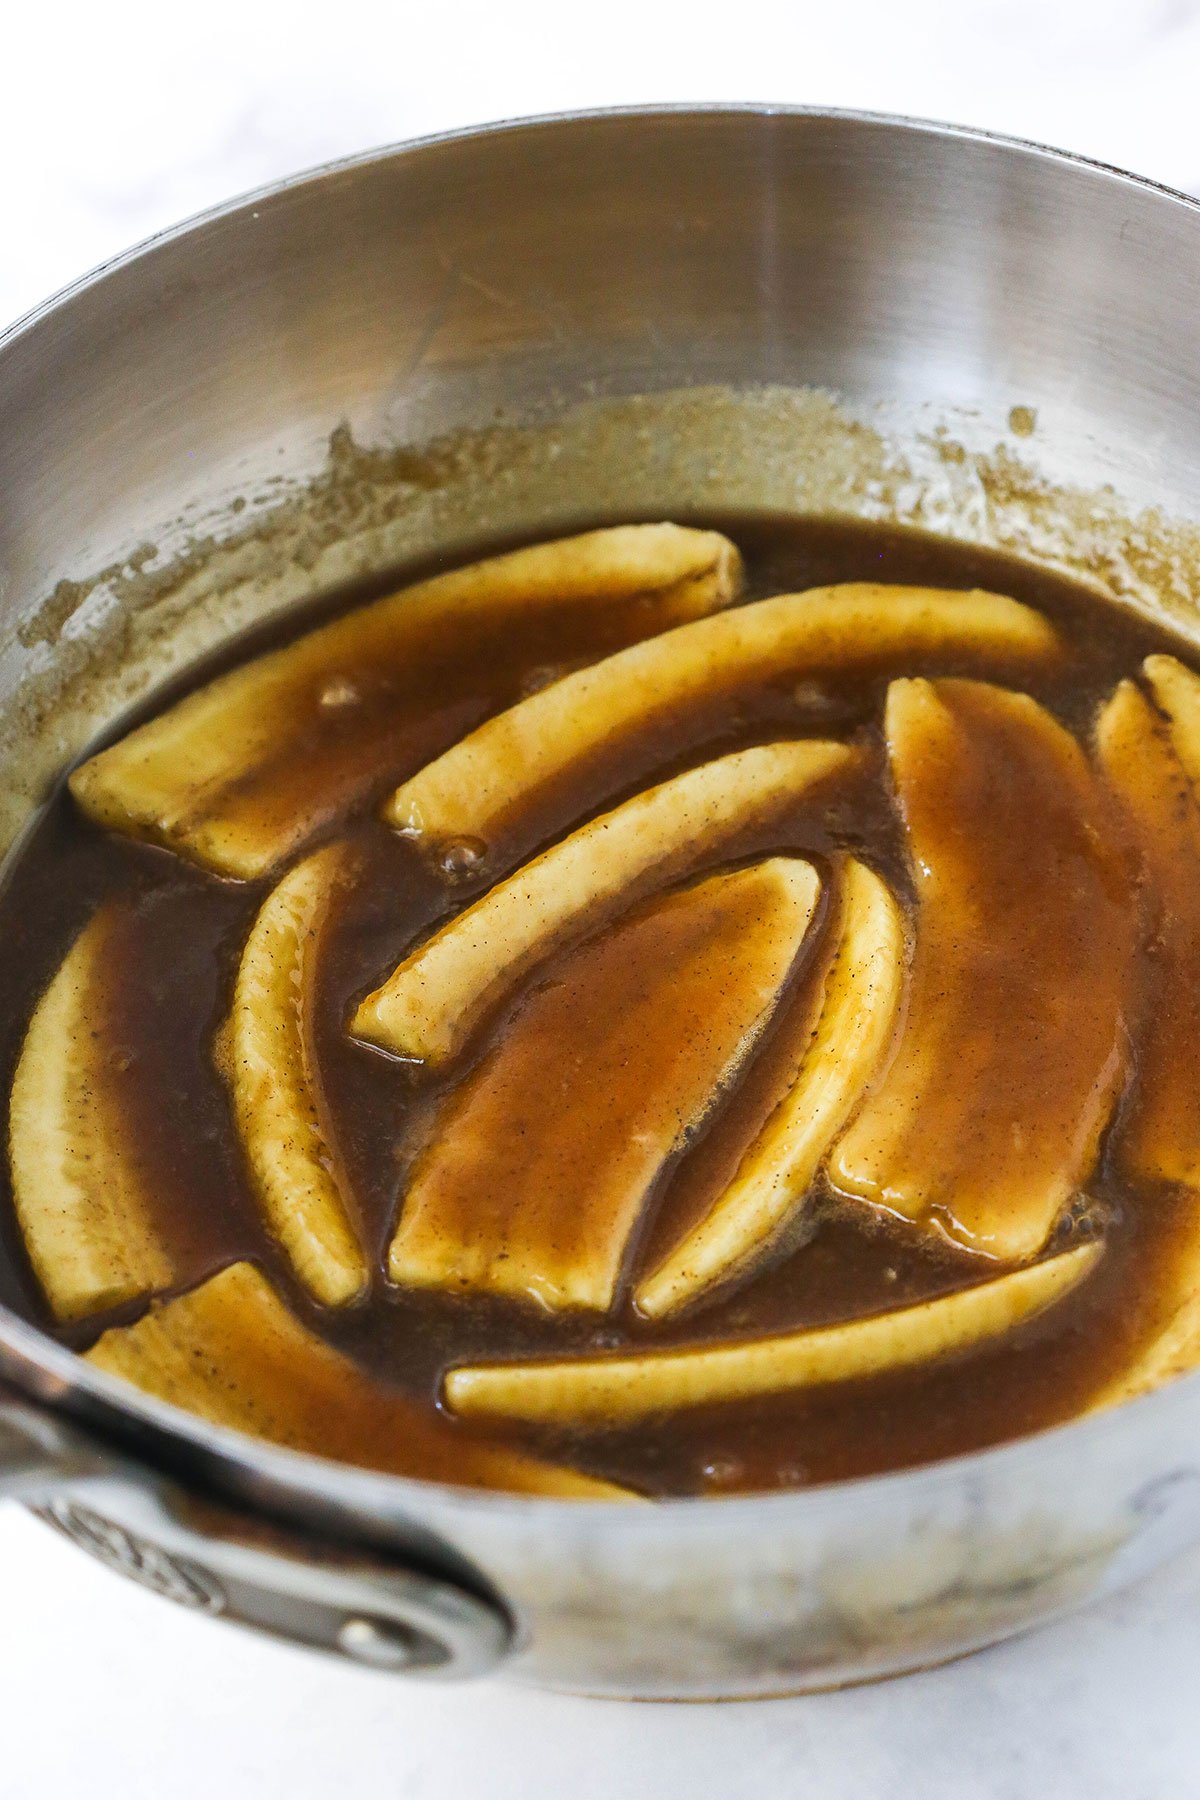 Bananas foster sitting inside of a large metal skillet on a kitchen countertop